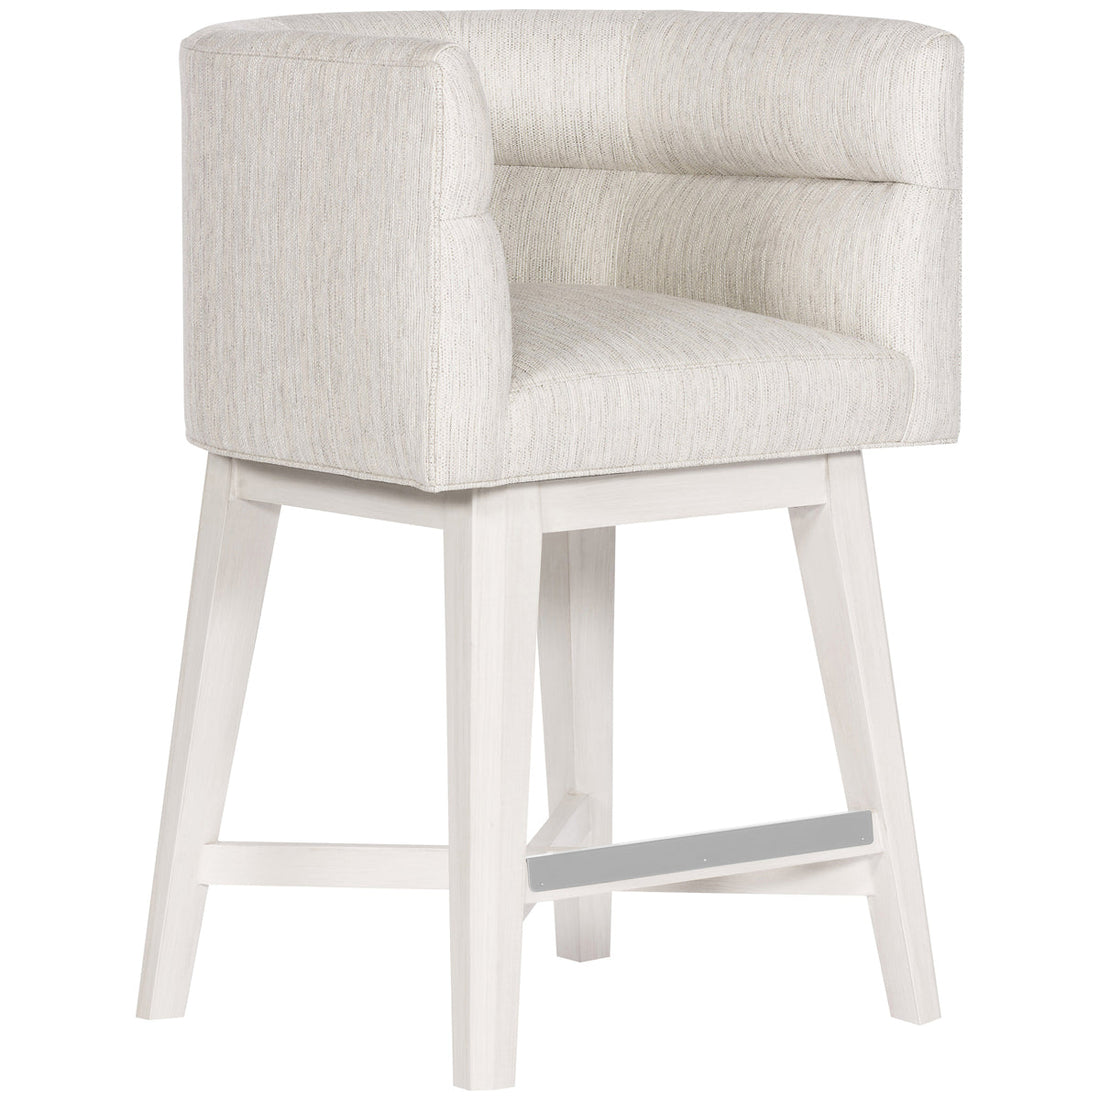 Vanguard Furniture Dining Counterstool with Wood Retro Swivel Base